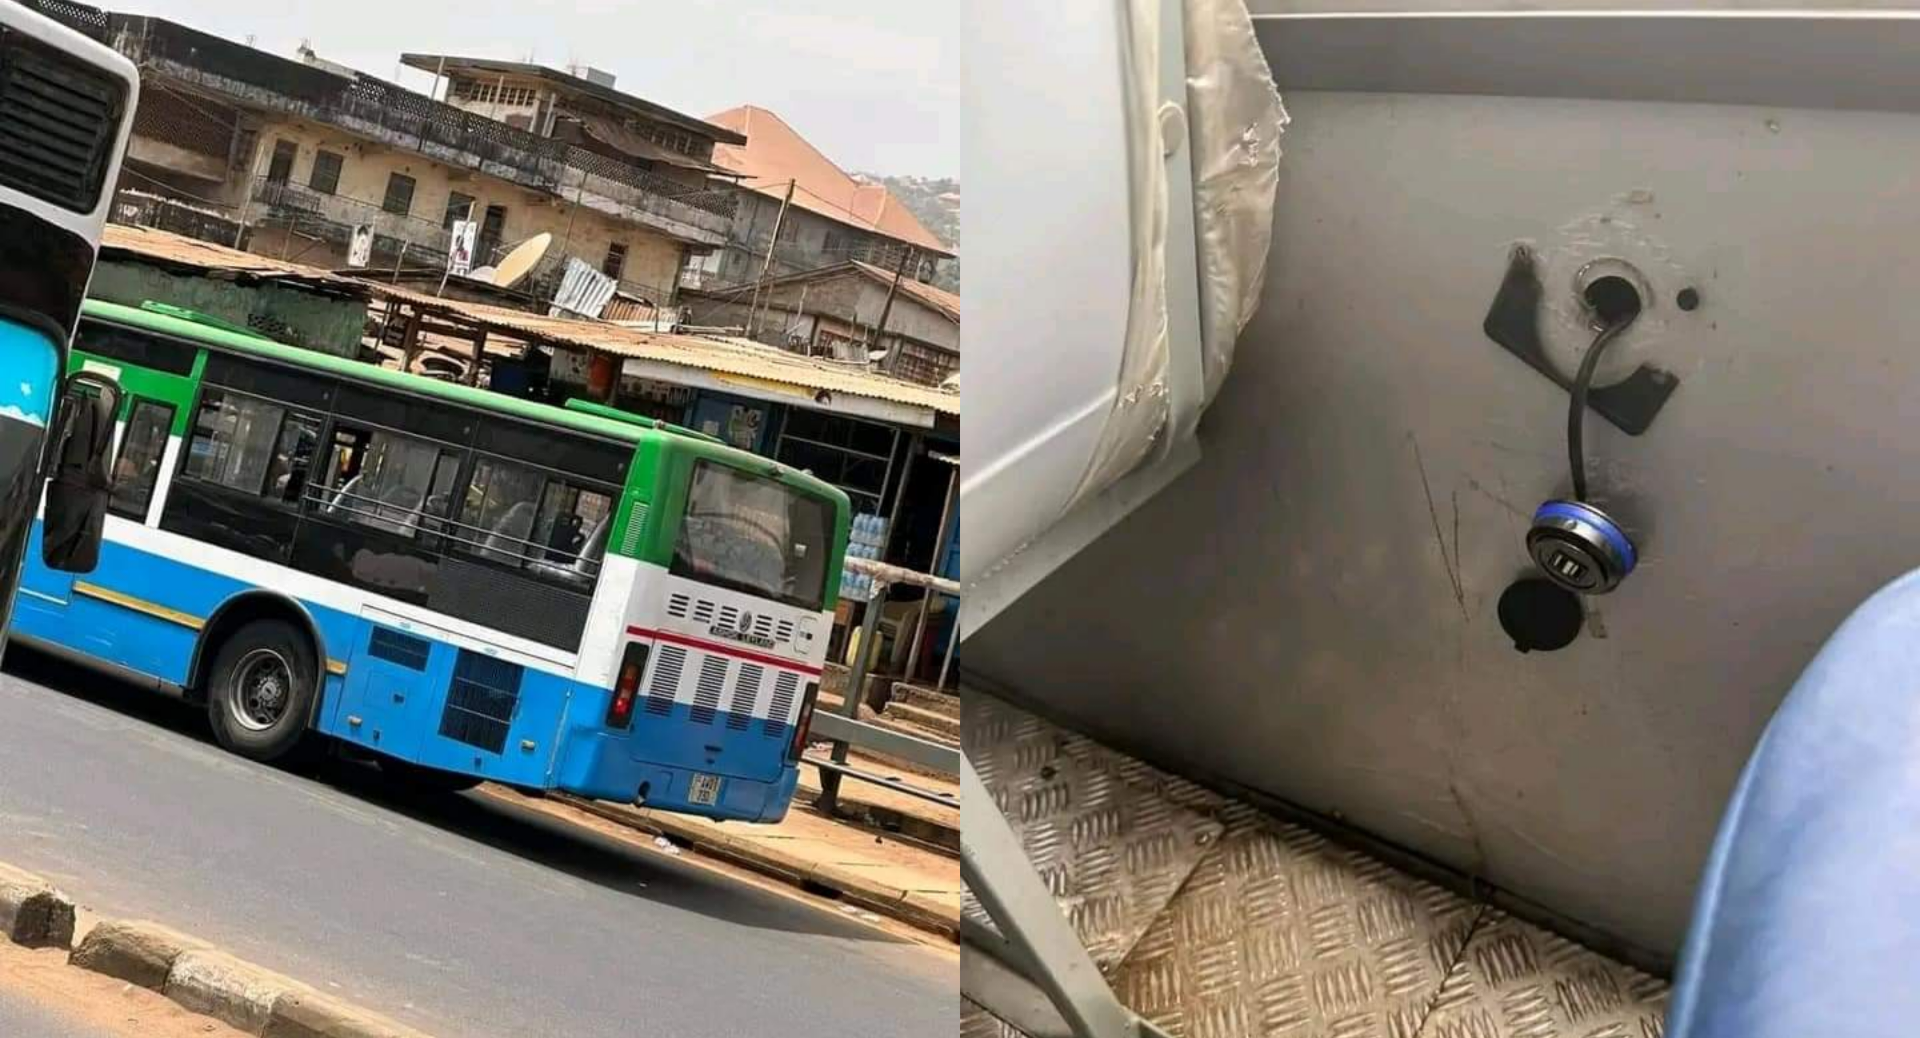 Government’s Waka Fine Bus Vandalized in Freetown